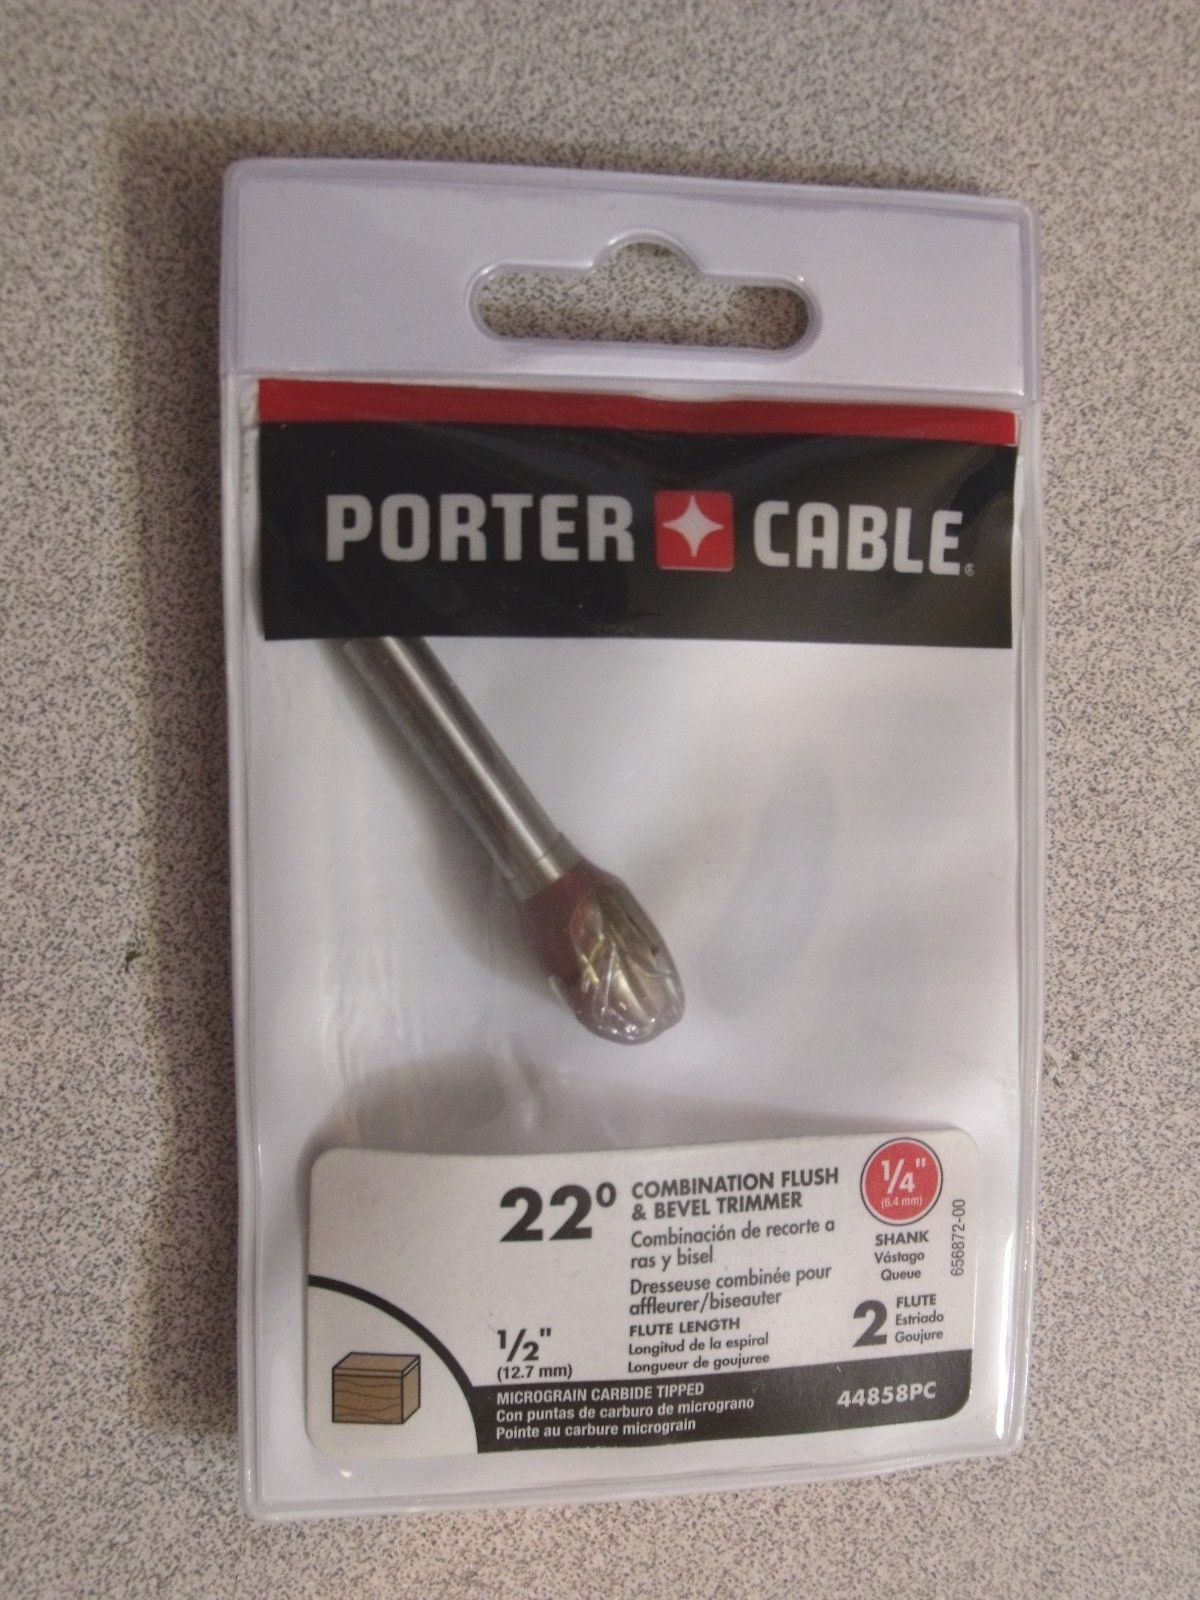 Porter Cable 44858PC 1/4" Combination Flush and 22° Bevel Cutting